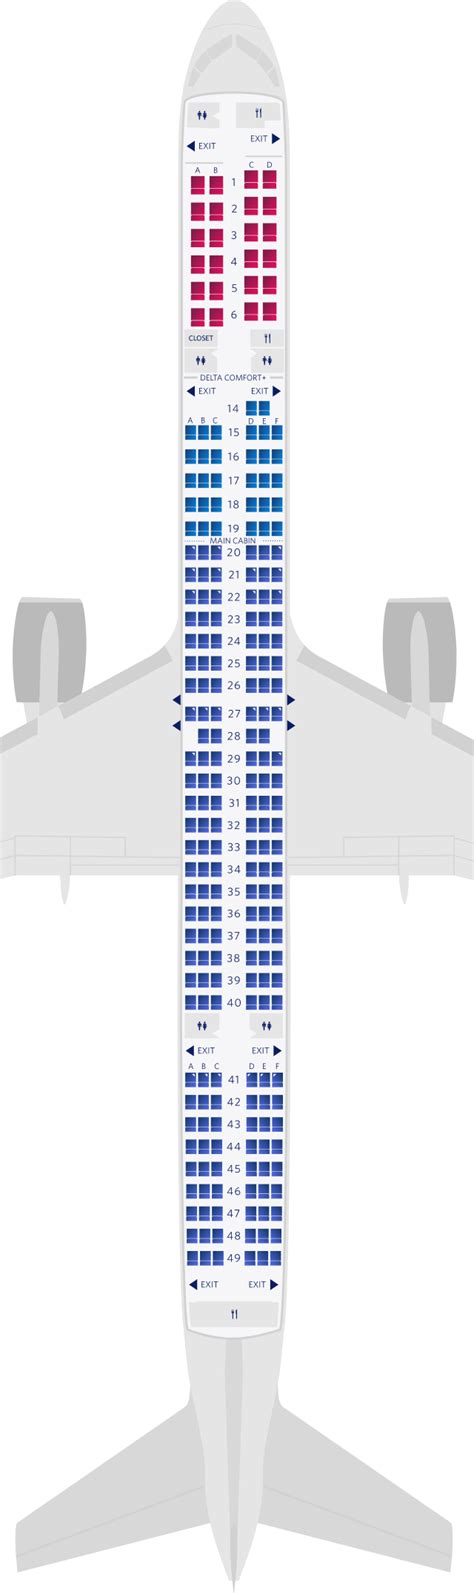 757-300 seat map delta. Planes & Seat Maps > Boeing 757-300 (753) Icelandair Seat Maps. Boeing 757-300 (753) Overview; Planes & Seat Maps. Boeing 737 MAX 8 (7M8) Boeing 757-200 (752) Layout 1; ... There are two classes on this Icelandair 757-300: Saga Class is Iceland Air's Business Class cabin. Passengers flying Saga Class enjoy good working space and Icelandair ... 